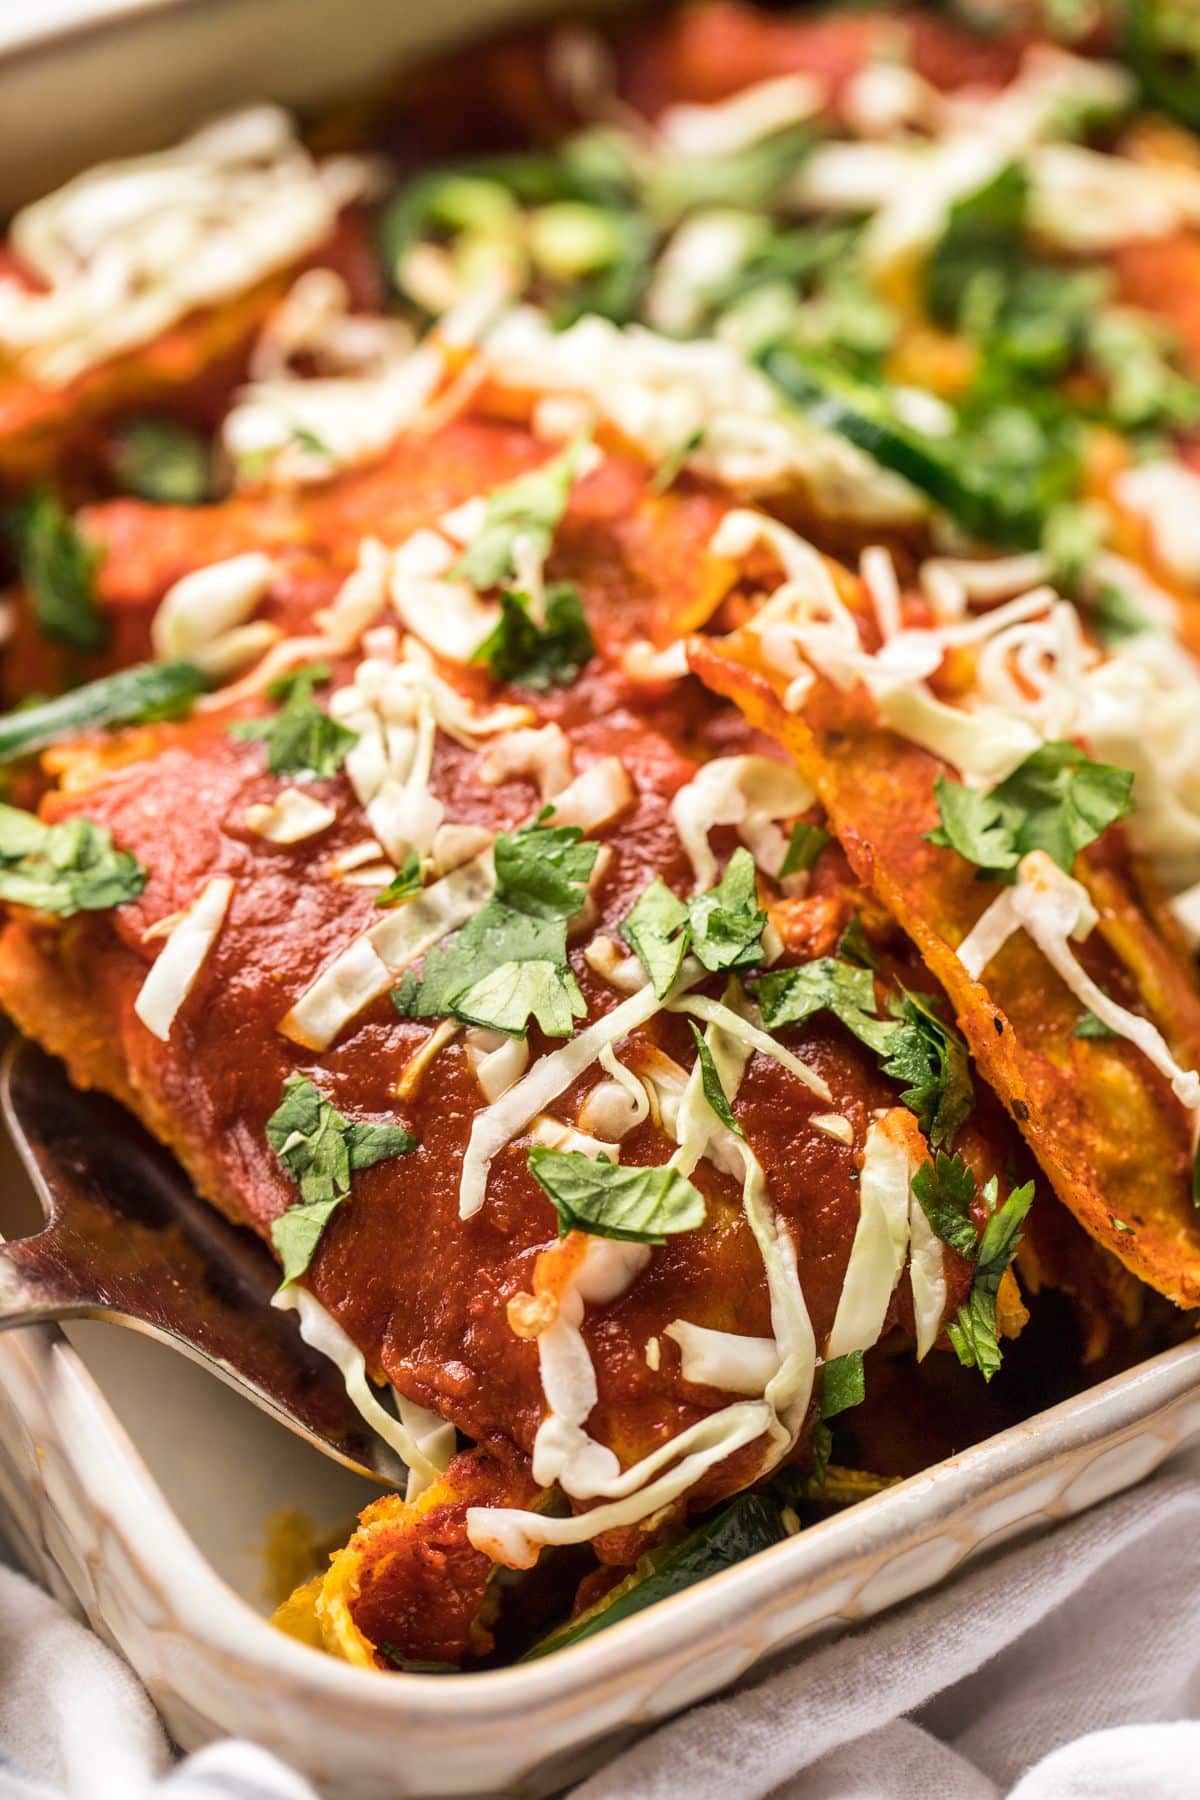 A casserole dish of healthy chicken enchiladas with a spatula scooping up a serving.